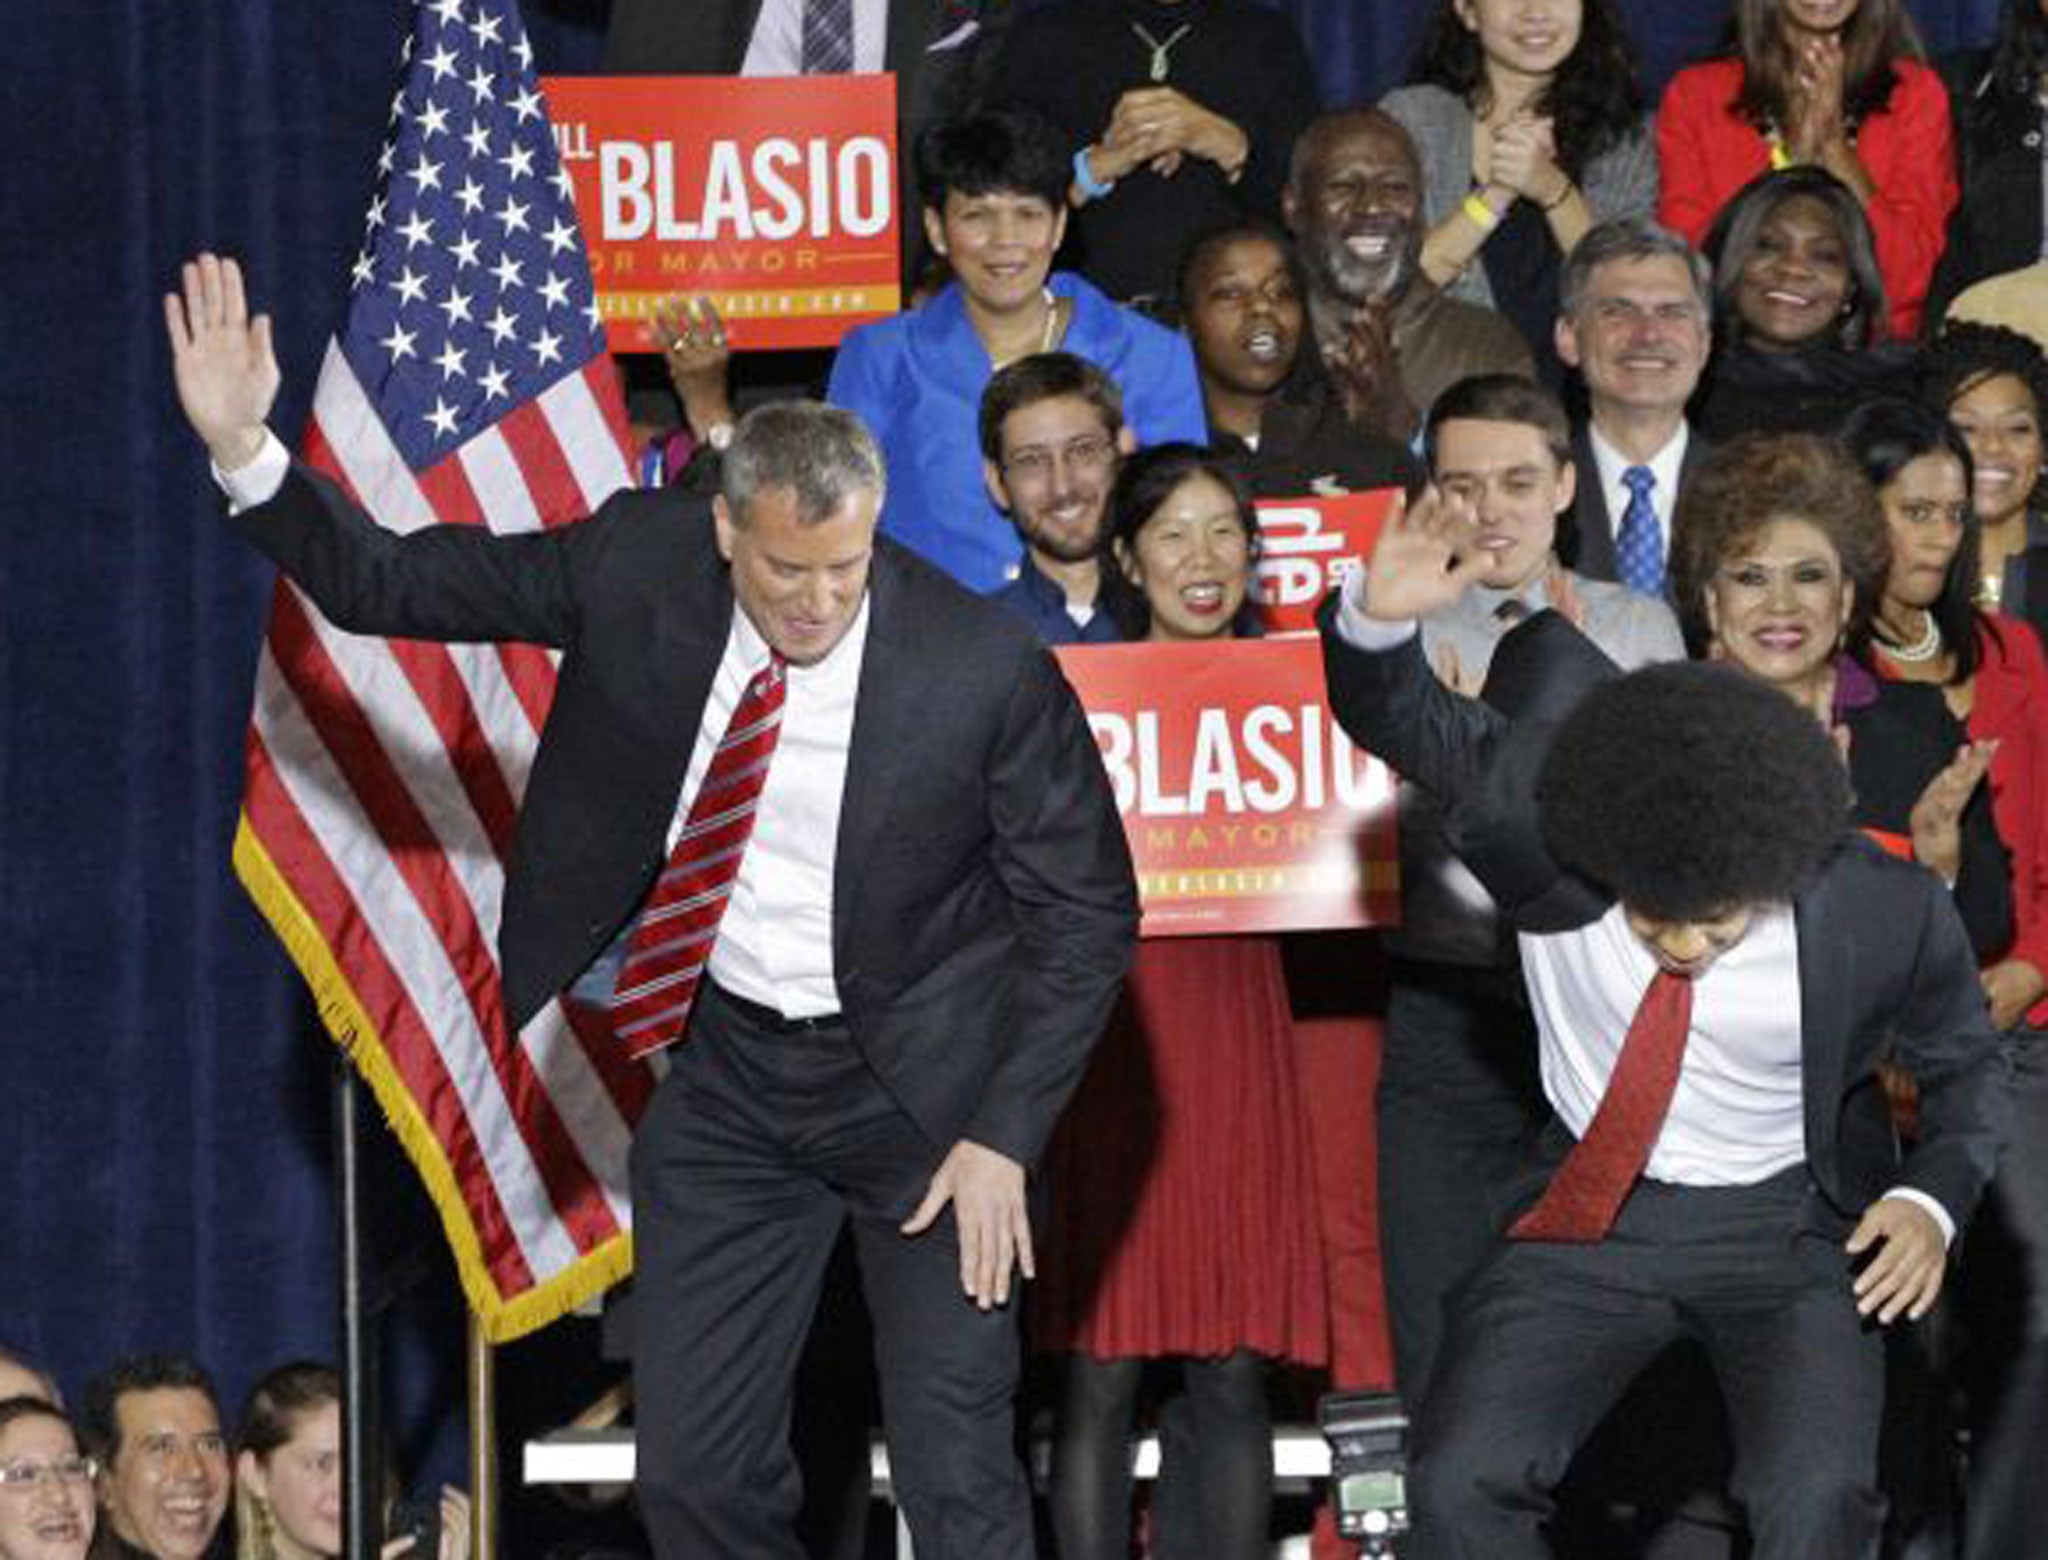 Supporters watch as Democratic mayor-elect Bill de Blasio and his son Dante perform the family's "smack down" dance on stage after de Blasio was elected mayorof New York City on November 5th